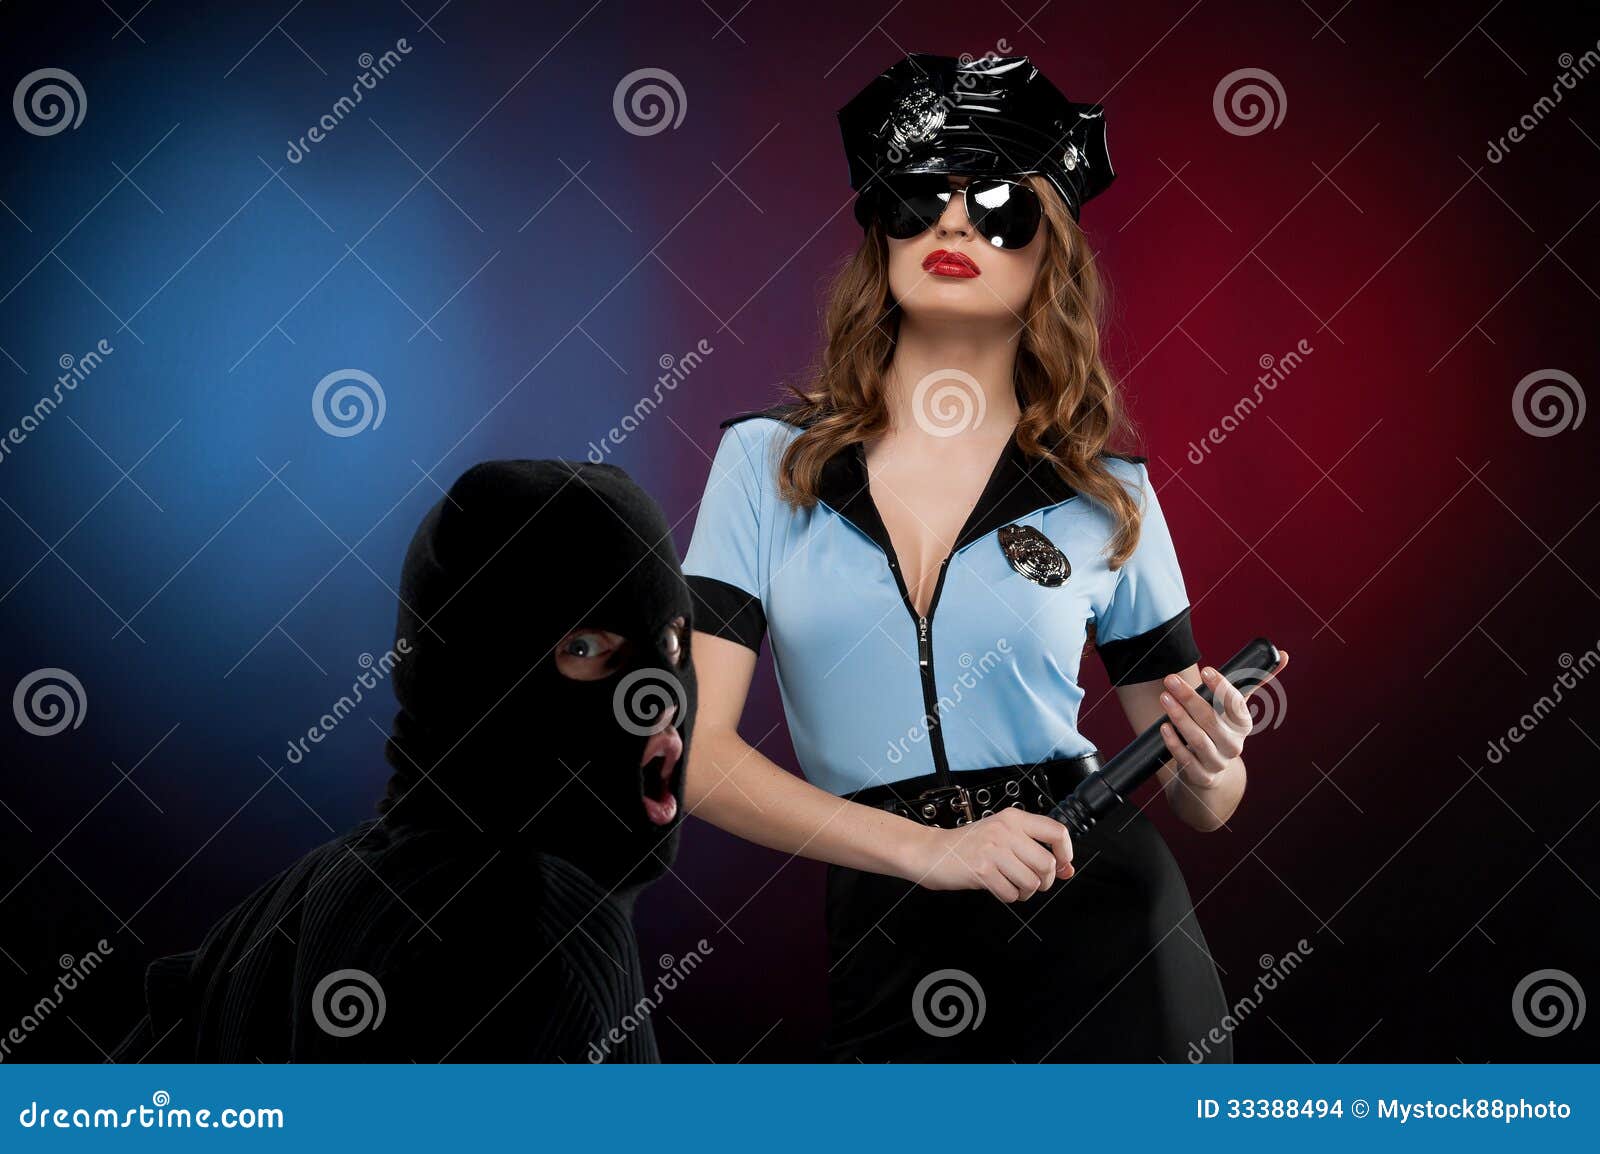 Policewoman at work pic